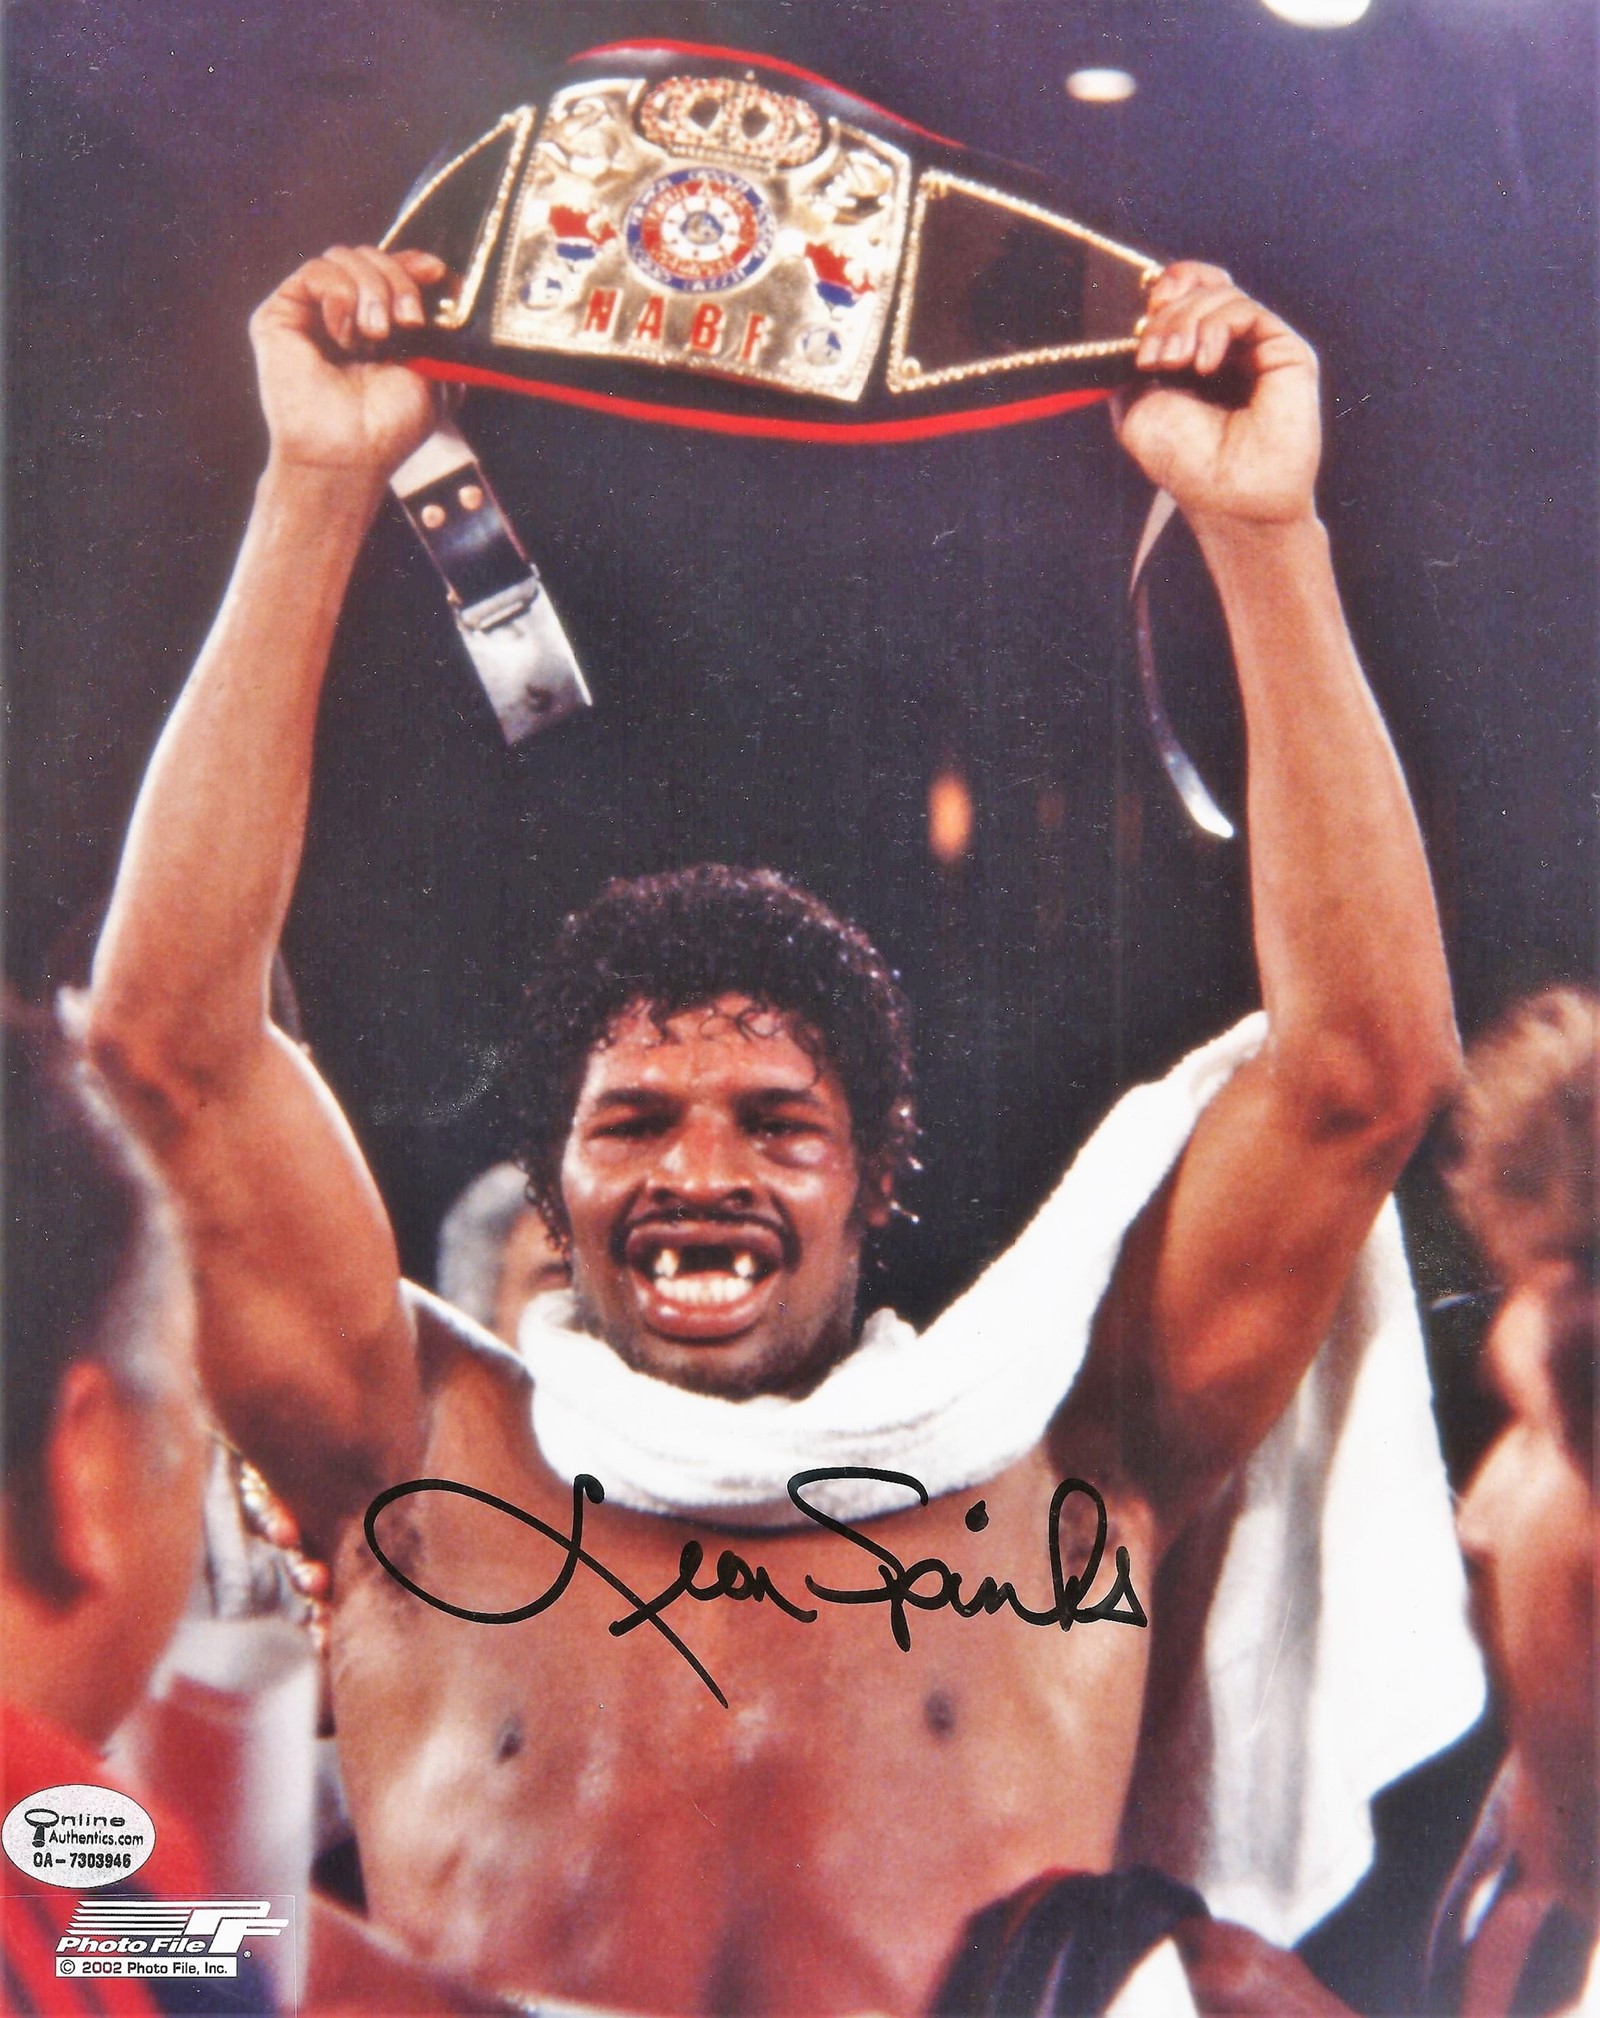 Boxing Leon Spinks signed 10x8 colour photo. Leon Spinks (July 11, 1953 - February 5, 2021) was an